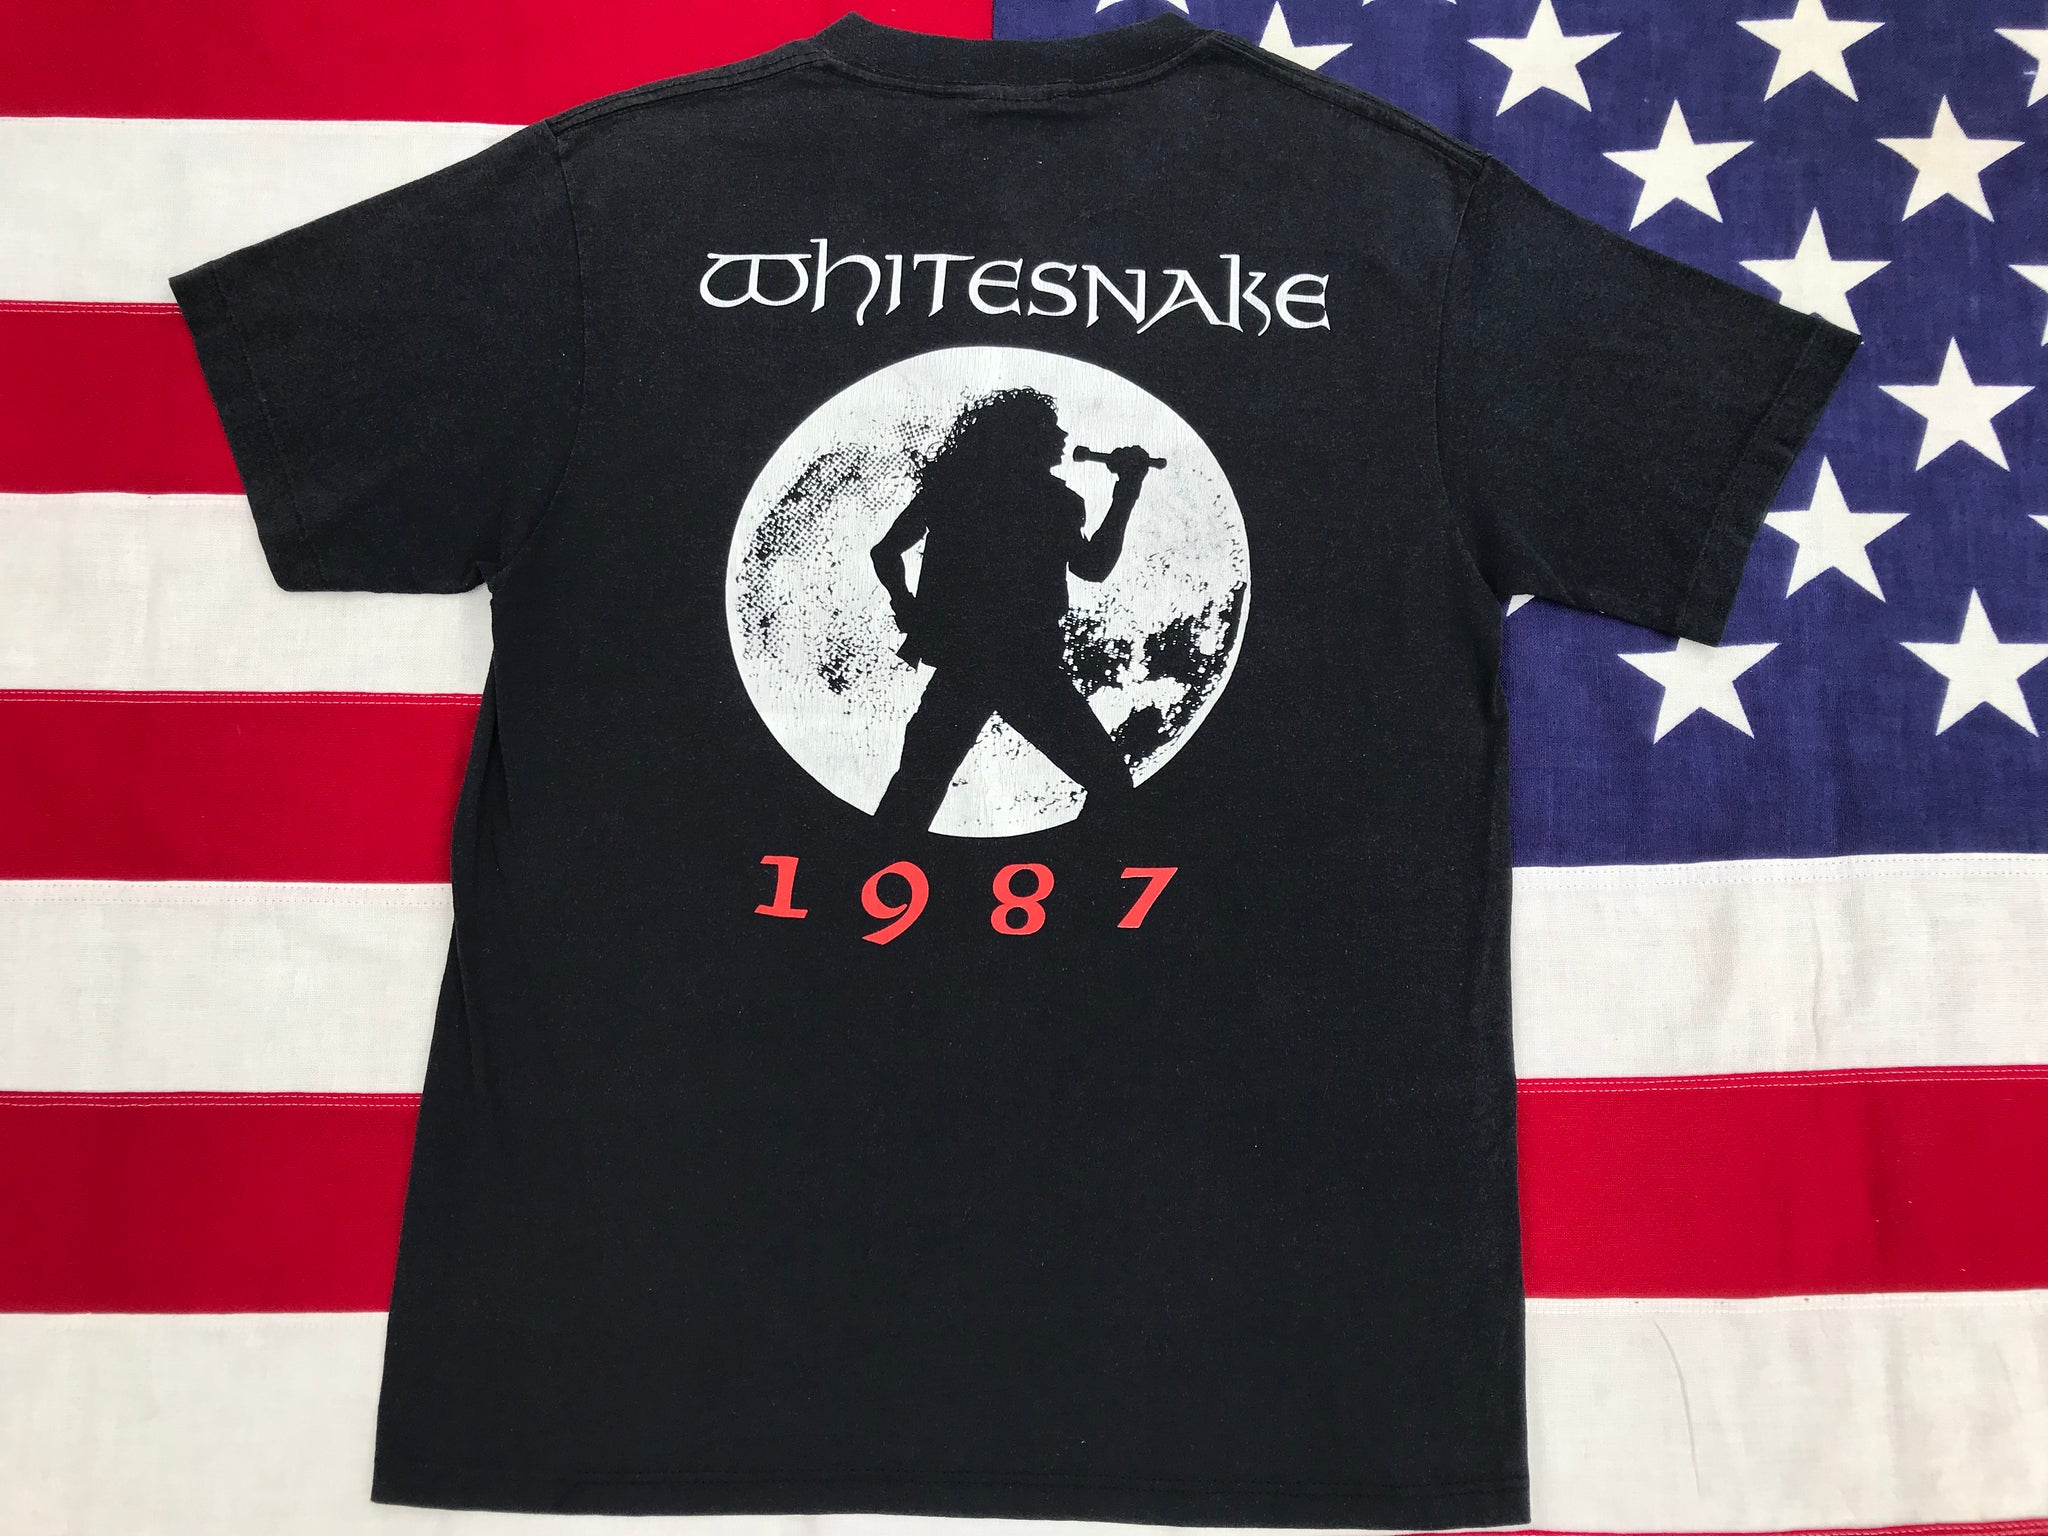 WHITESNAKE David Coverdale 1987 Original Vintage Rock T-Shirt By Spring Ford Classic Sportswear Made in USA